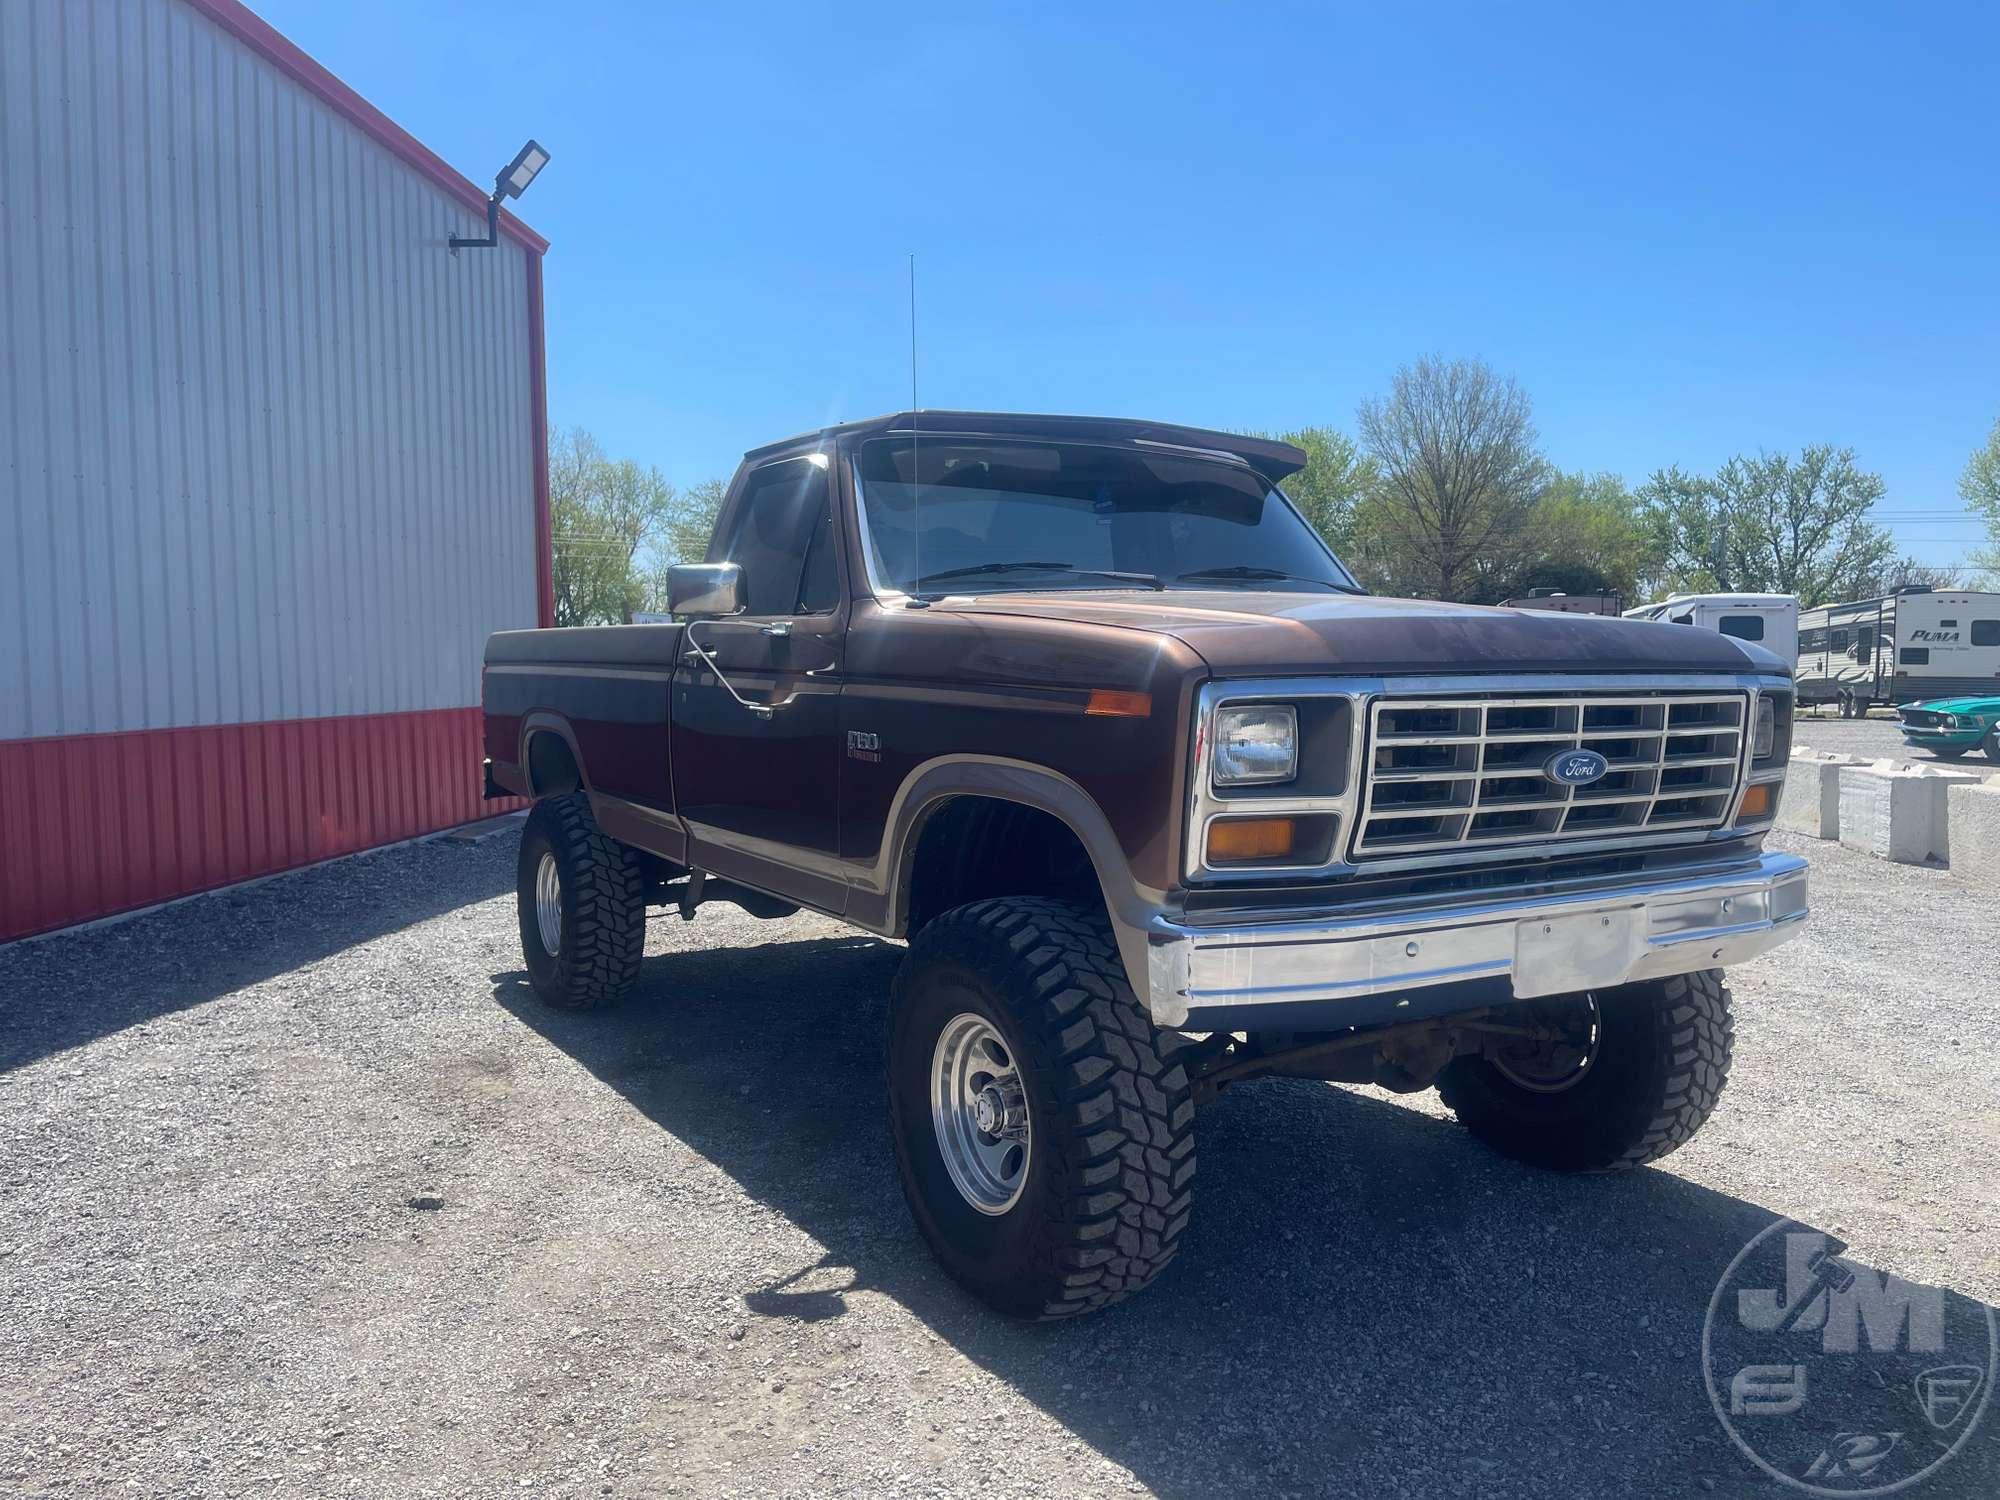 1986 FORD F-150 4X4 VIN: 1FTEF14H4GNA71595 PICKUP